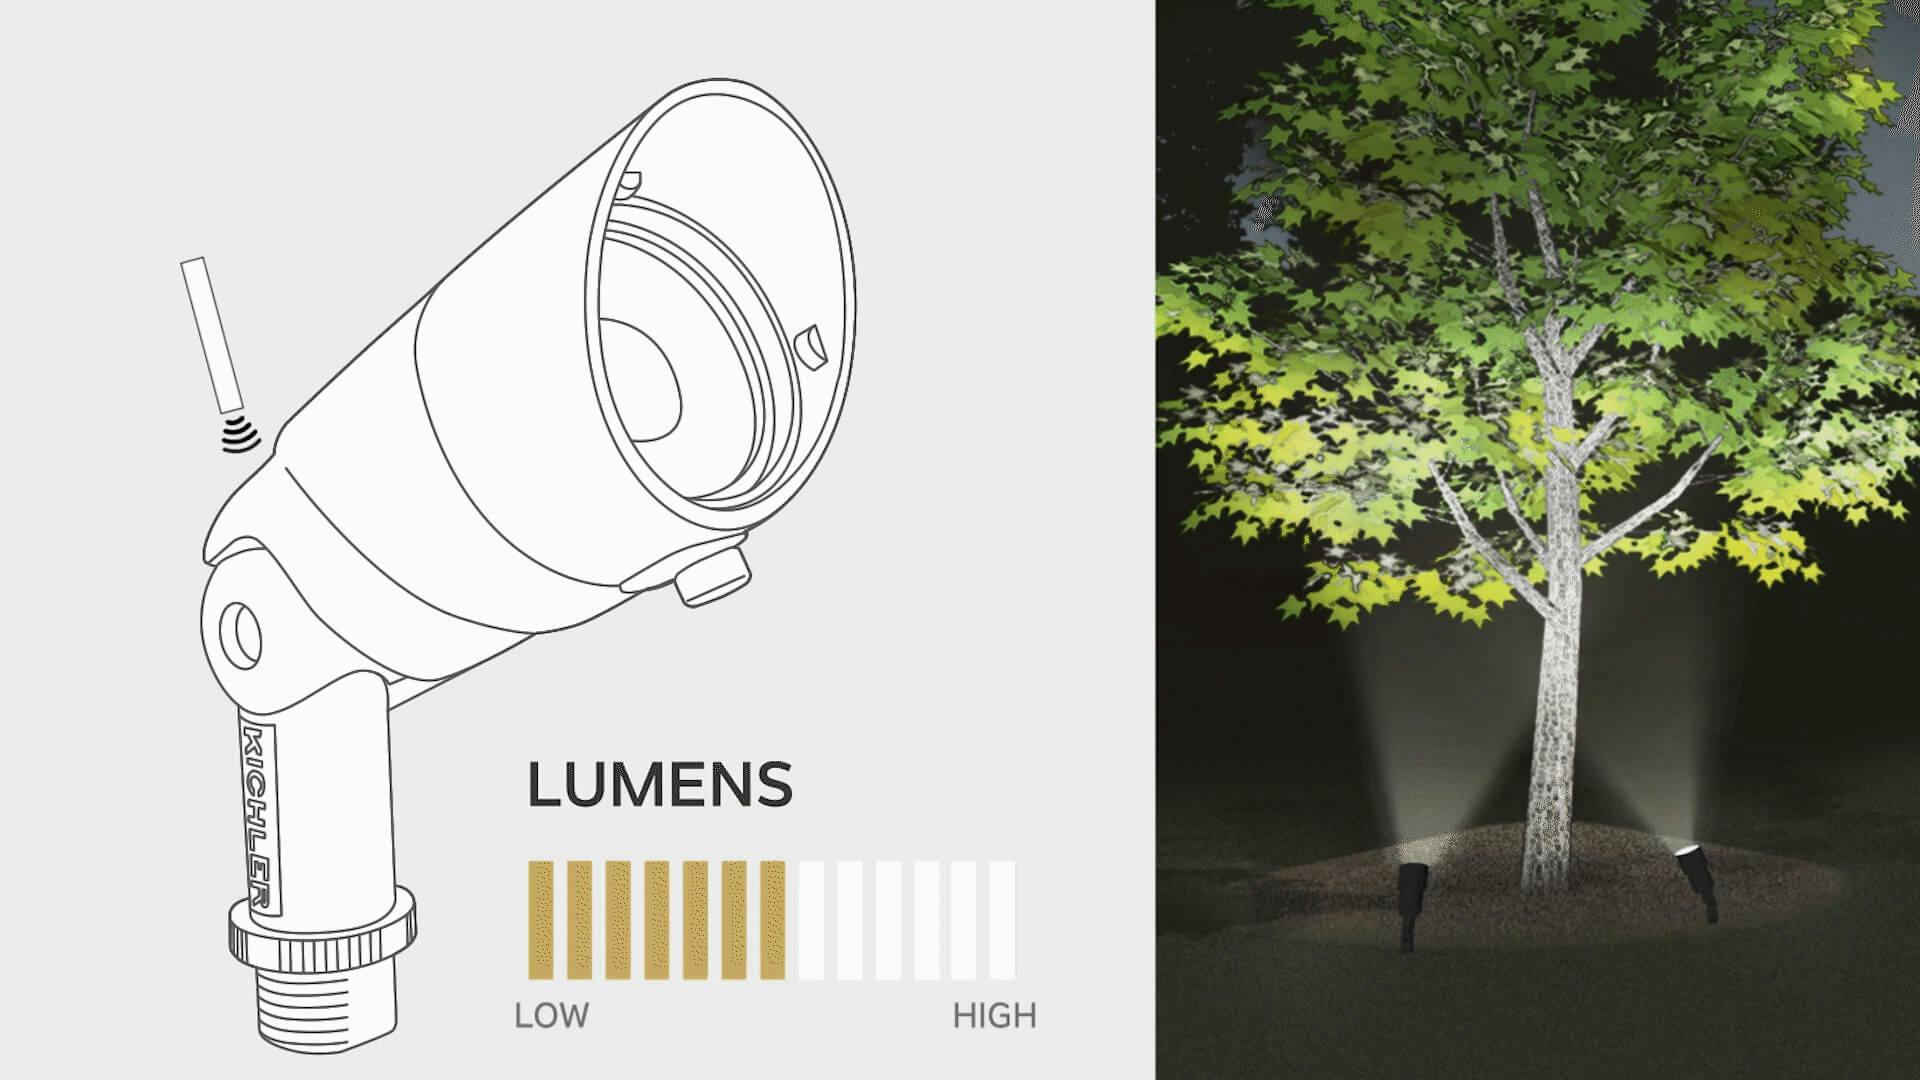 Illustrated image of a VLO ground light demonstrating it's low to high settings to adjust brightness for uplighting